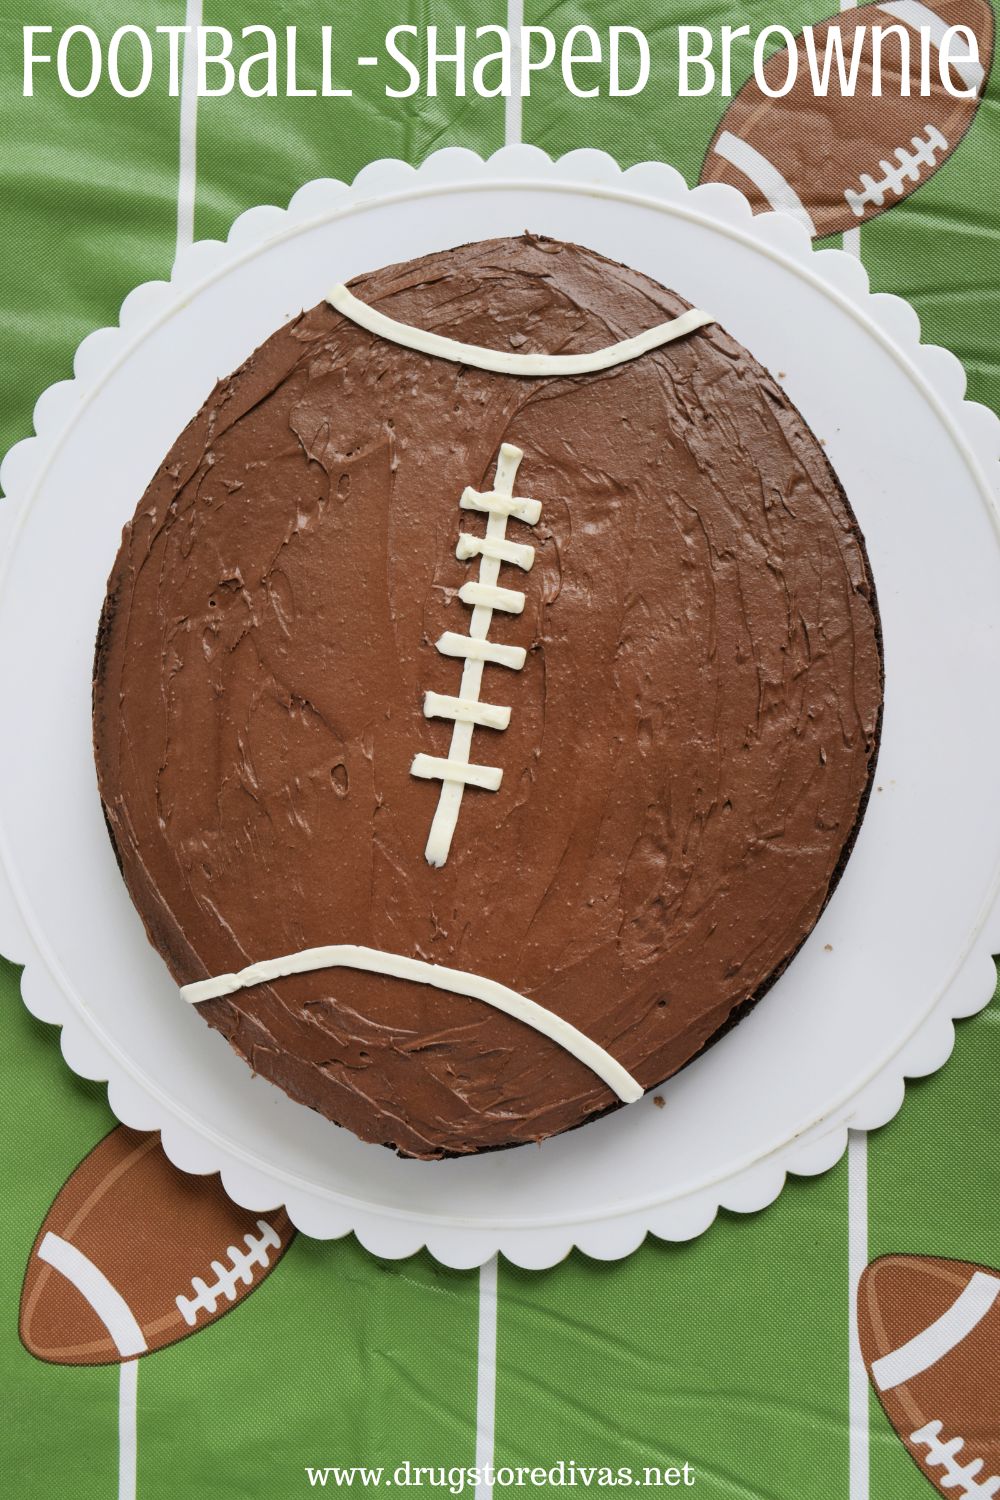 A brownie decorated like a football on a white plate with scalloped edges on a football-themed tablecloth with the words 